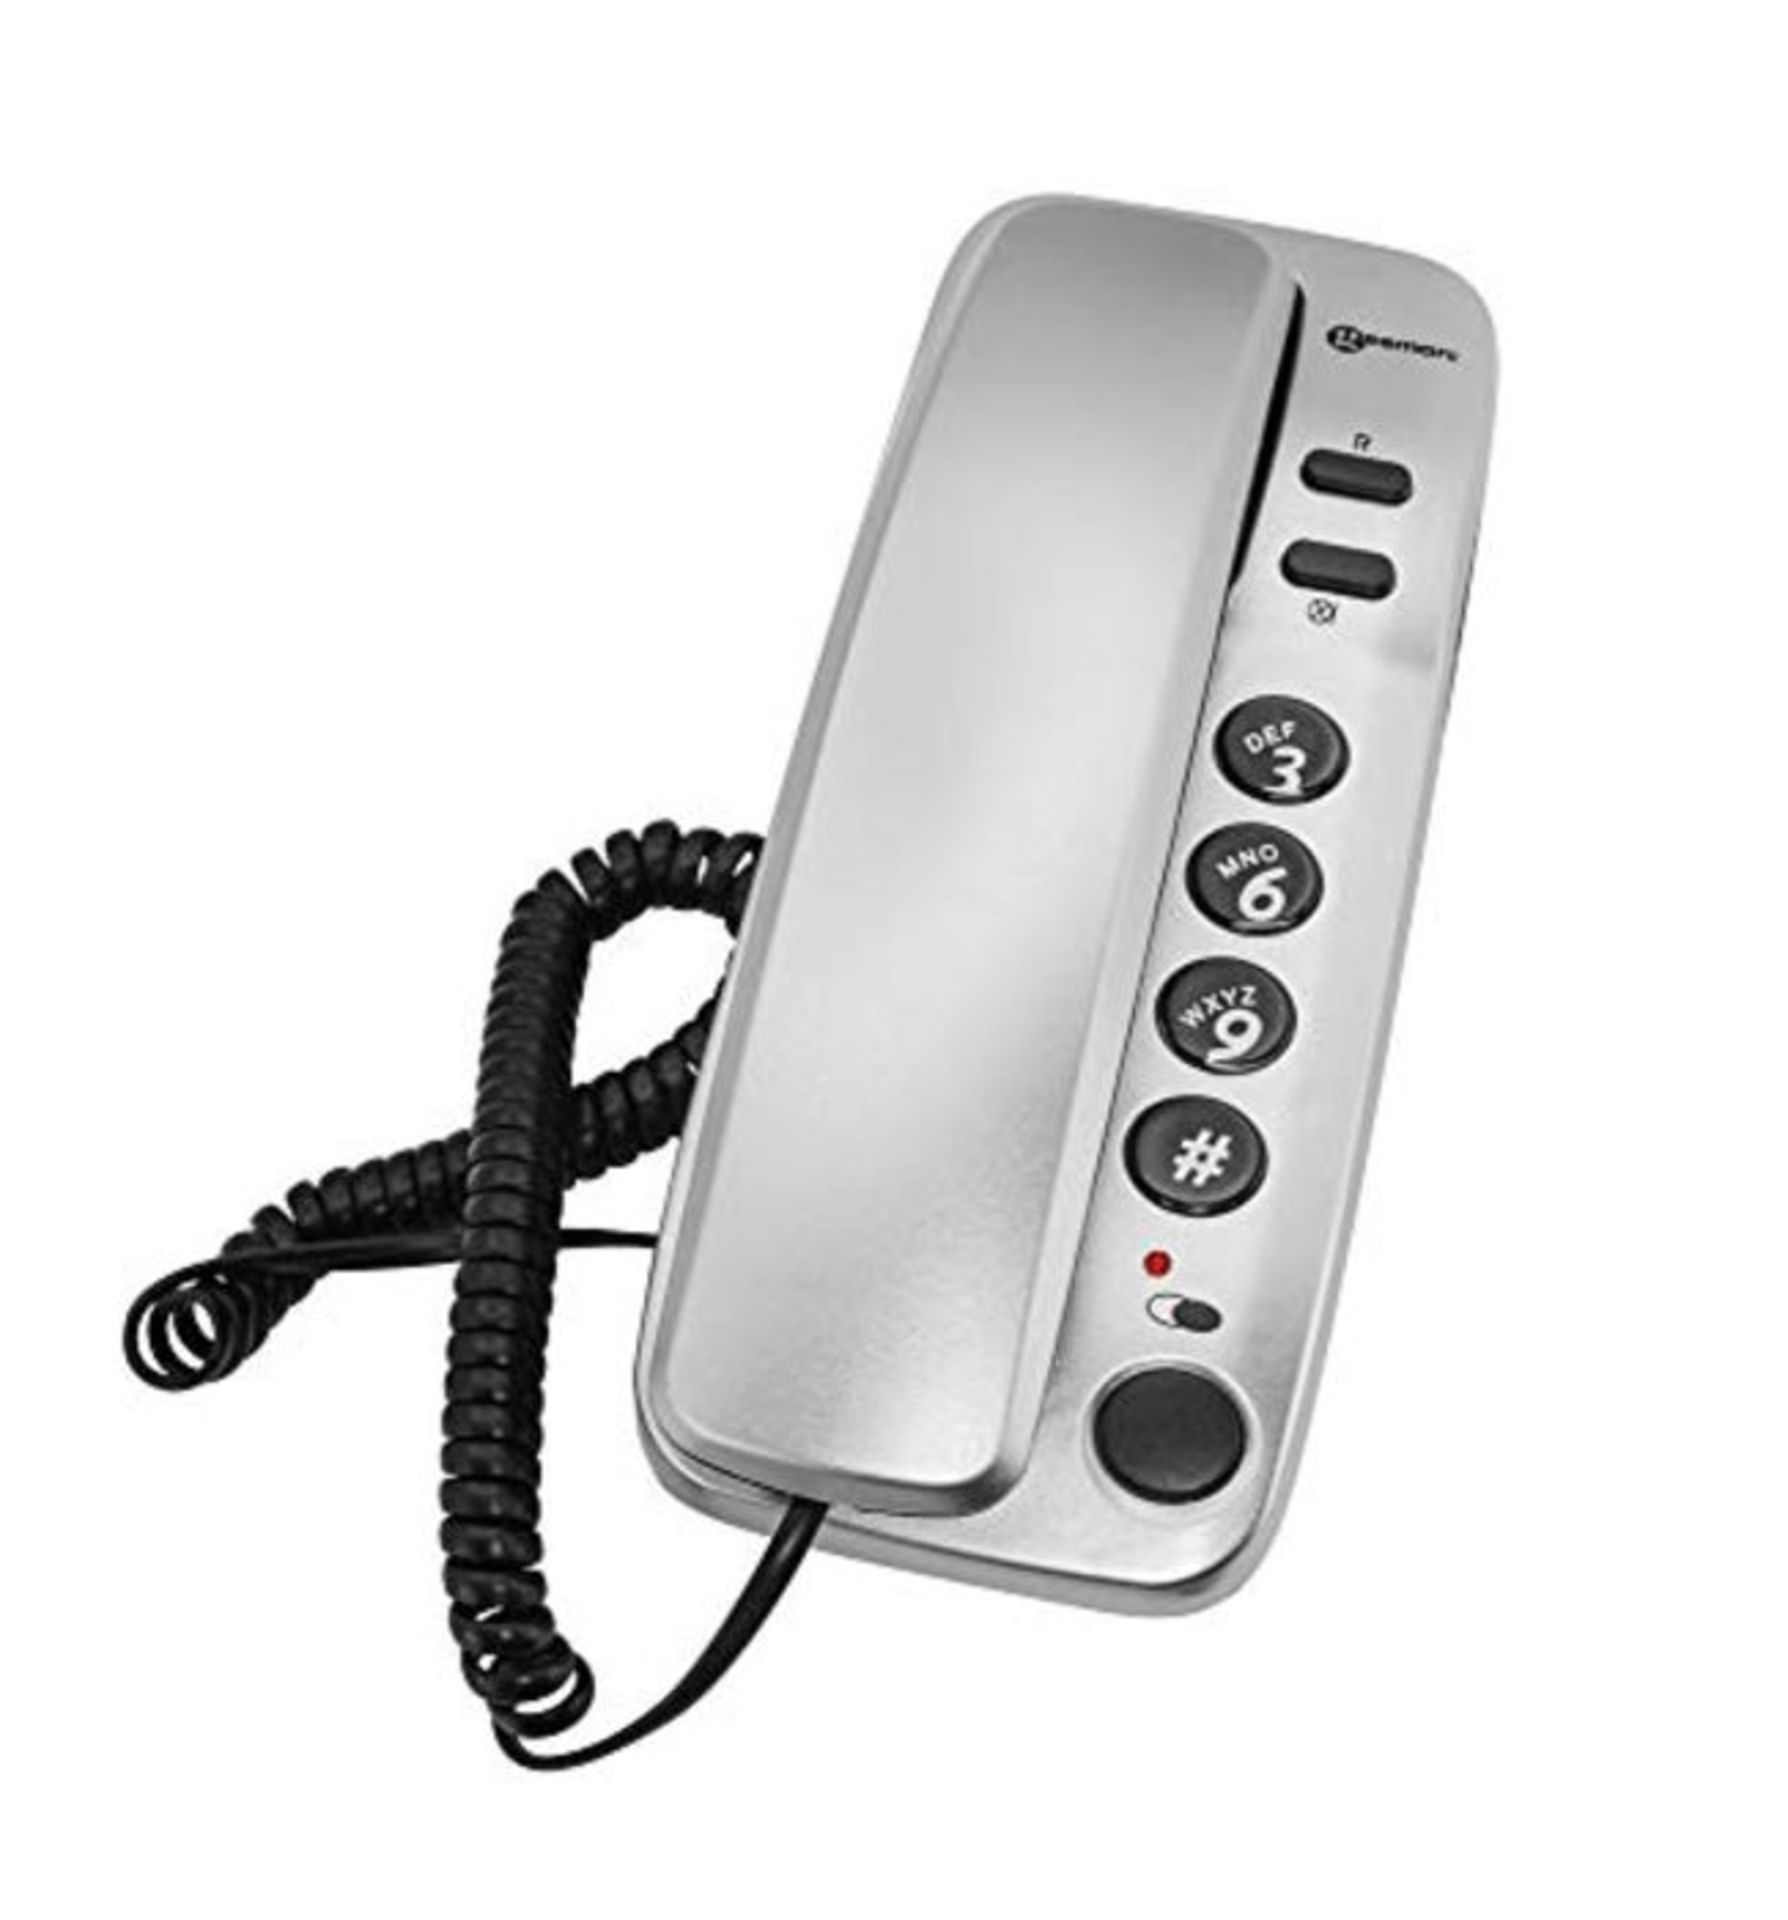 Geemarc Marbella - Gondola Style Corded Analogue Telephone with Large Buttons, Mute an